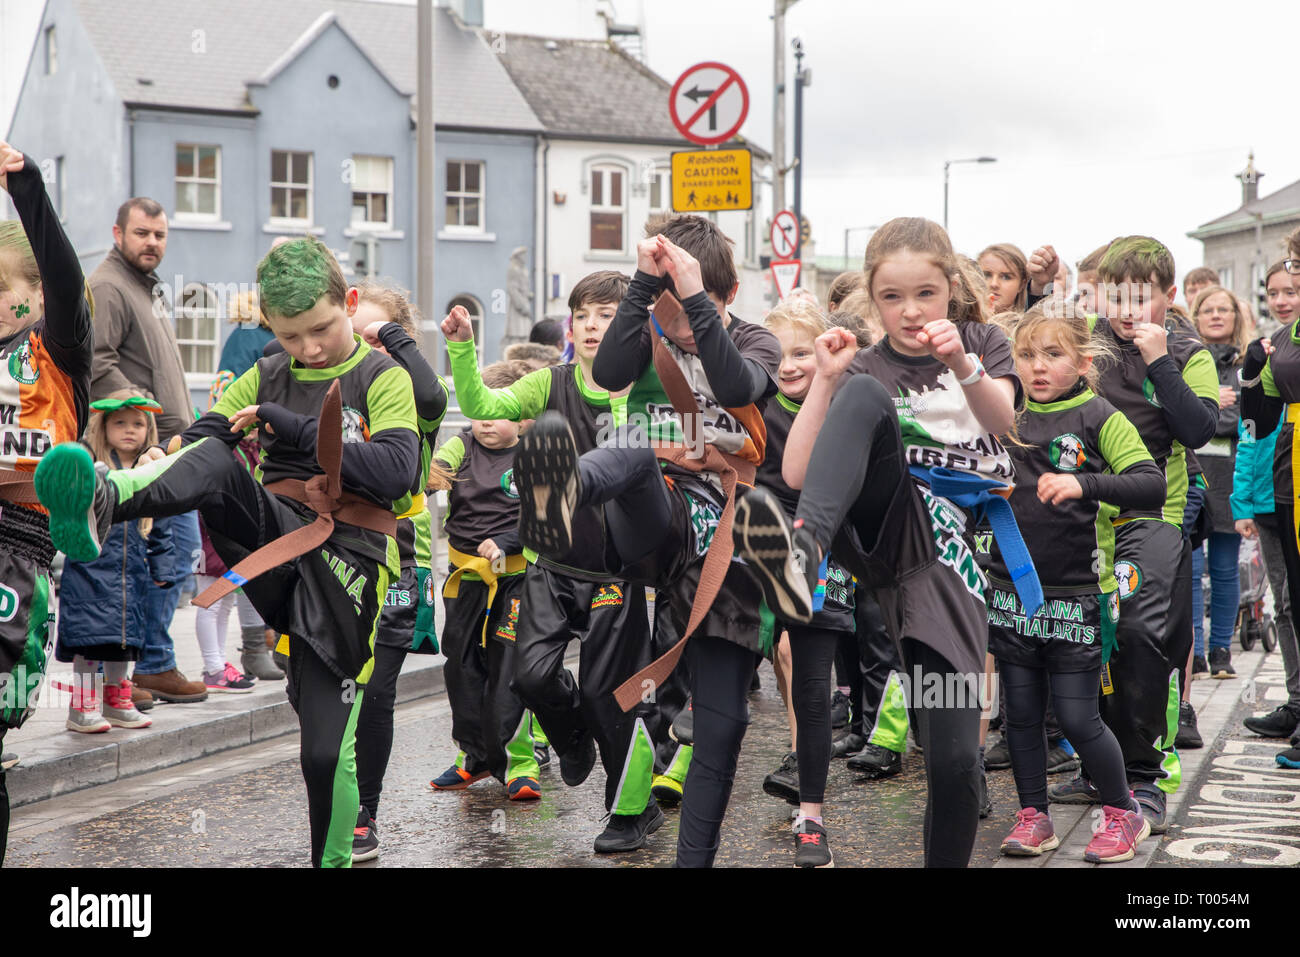 Athlone Town, Ireland. 16th March 2019. The kids from teh Athlone Kickboxing Club shoing off their moves during the 2019 4Athlone St Patricks Day Parade. Credit: Eoin Healy/Alamy Live News Stock Photo